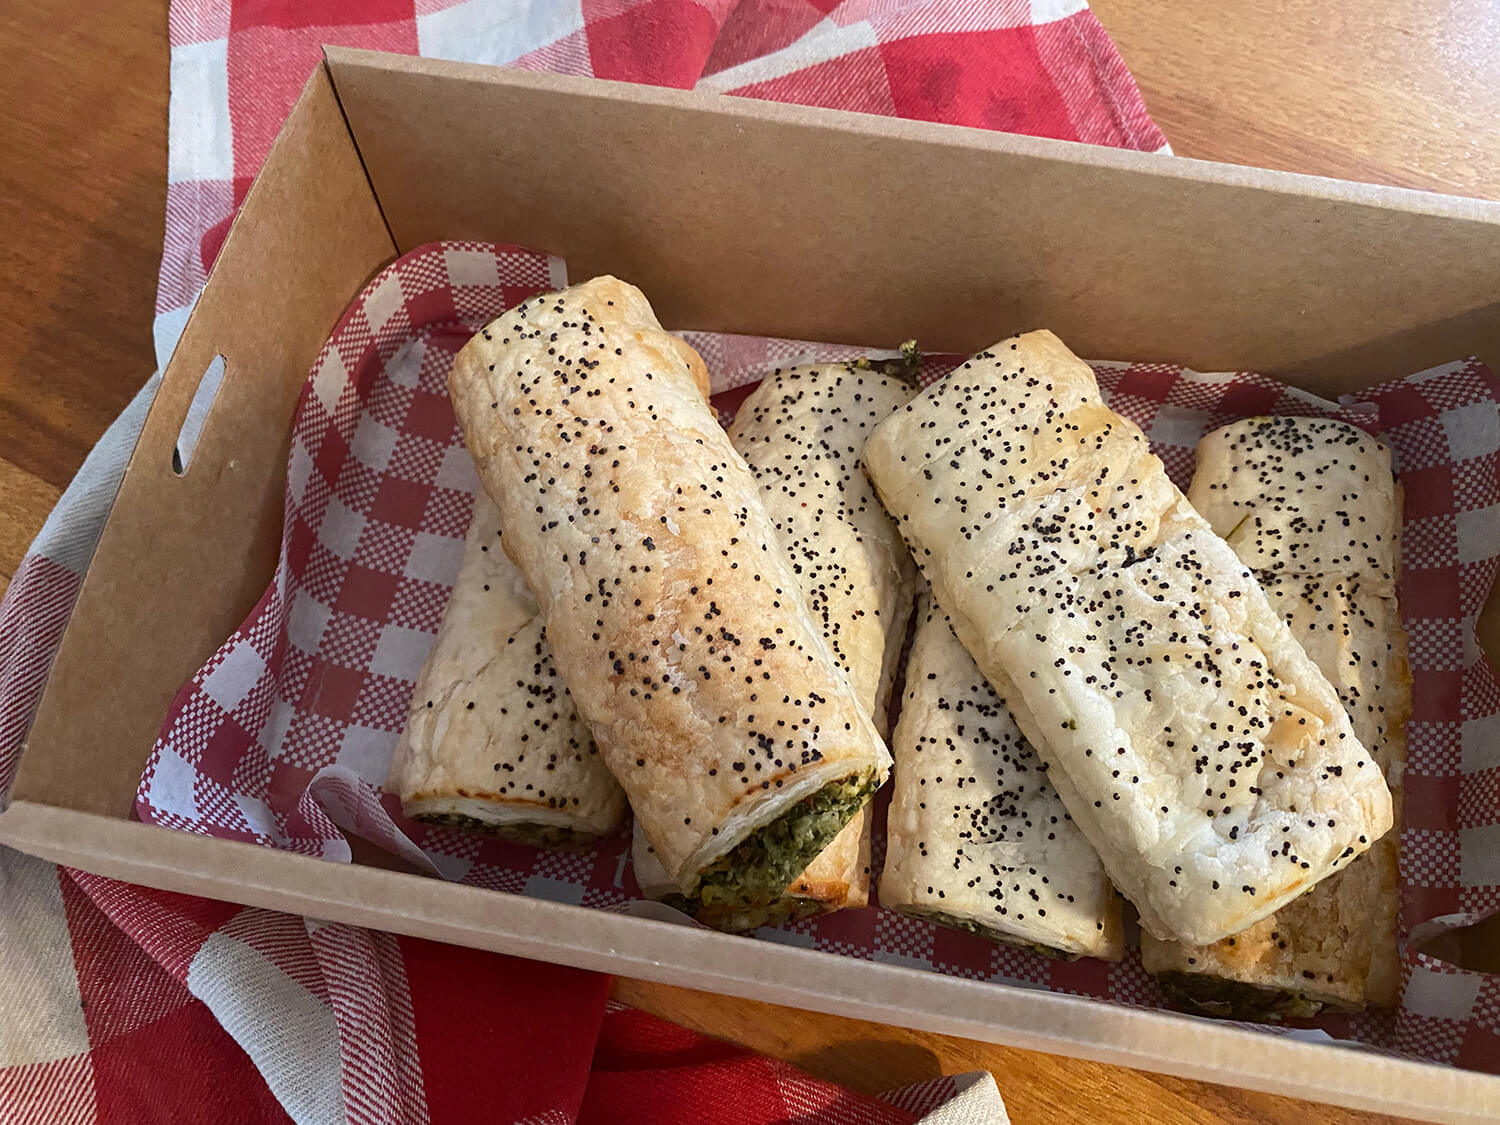 Savoury Pack - Cheese and Spinach Rolls